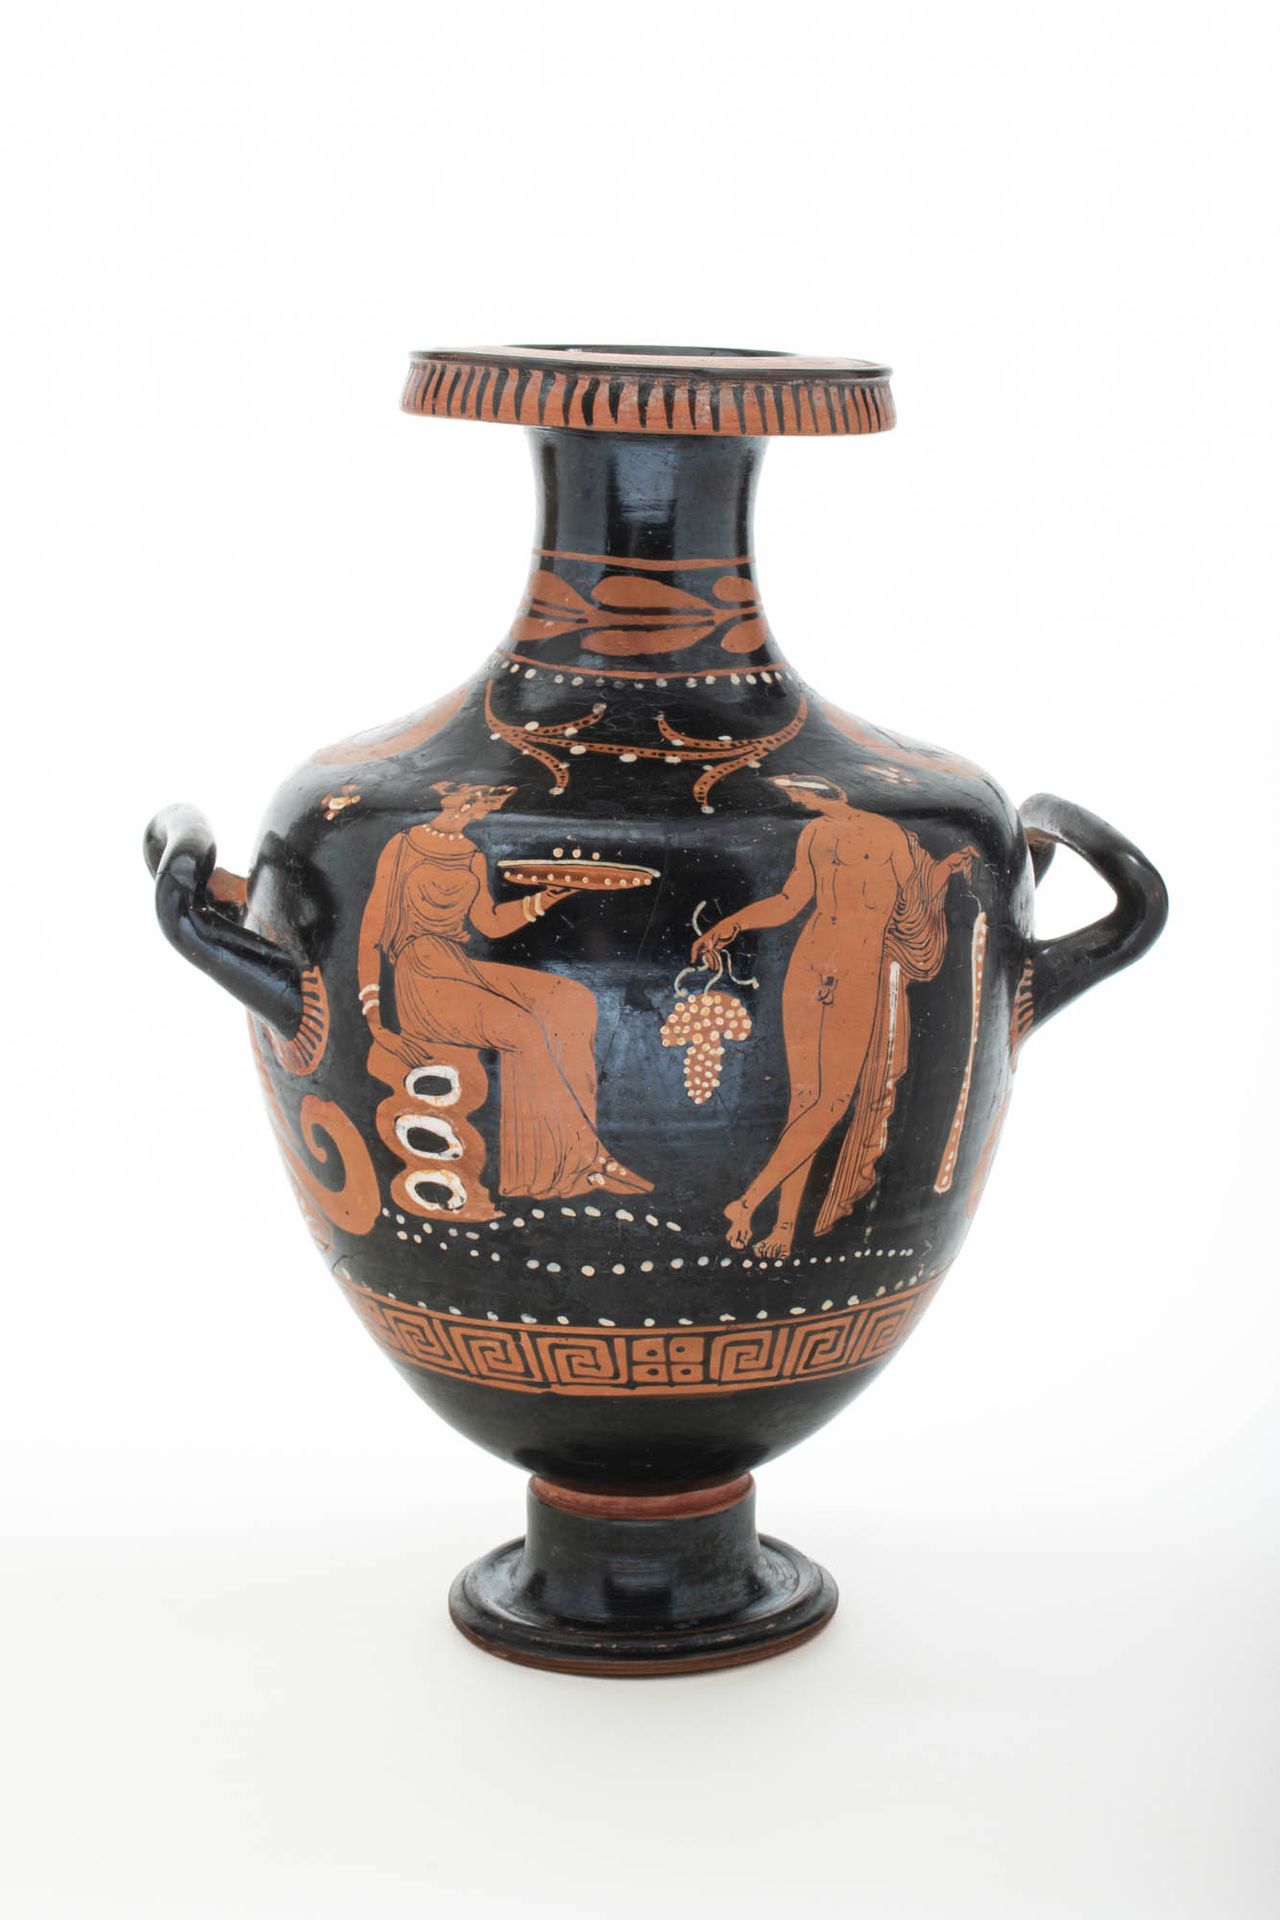 APULIAN RED-FIGURE HYDRIA WITH MAENAD AND DIONYSUS Ca. 340 - 320 A.C.
Impresiona&hellip;